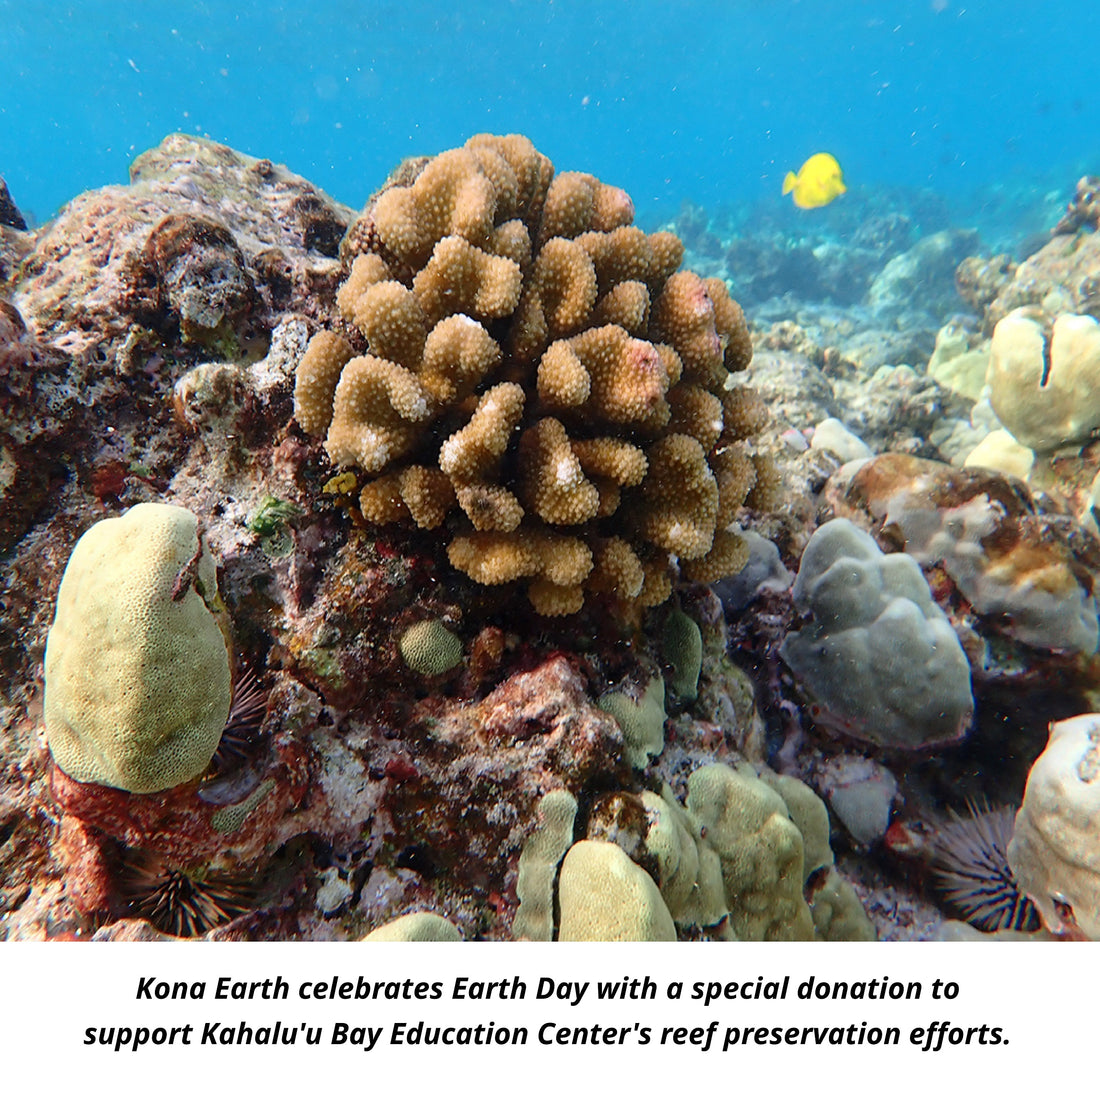 Kona Earth Celebrates Earth Day with a Special Donation